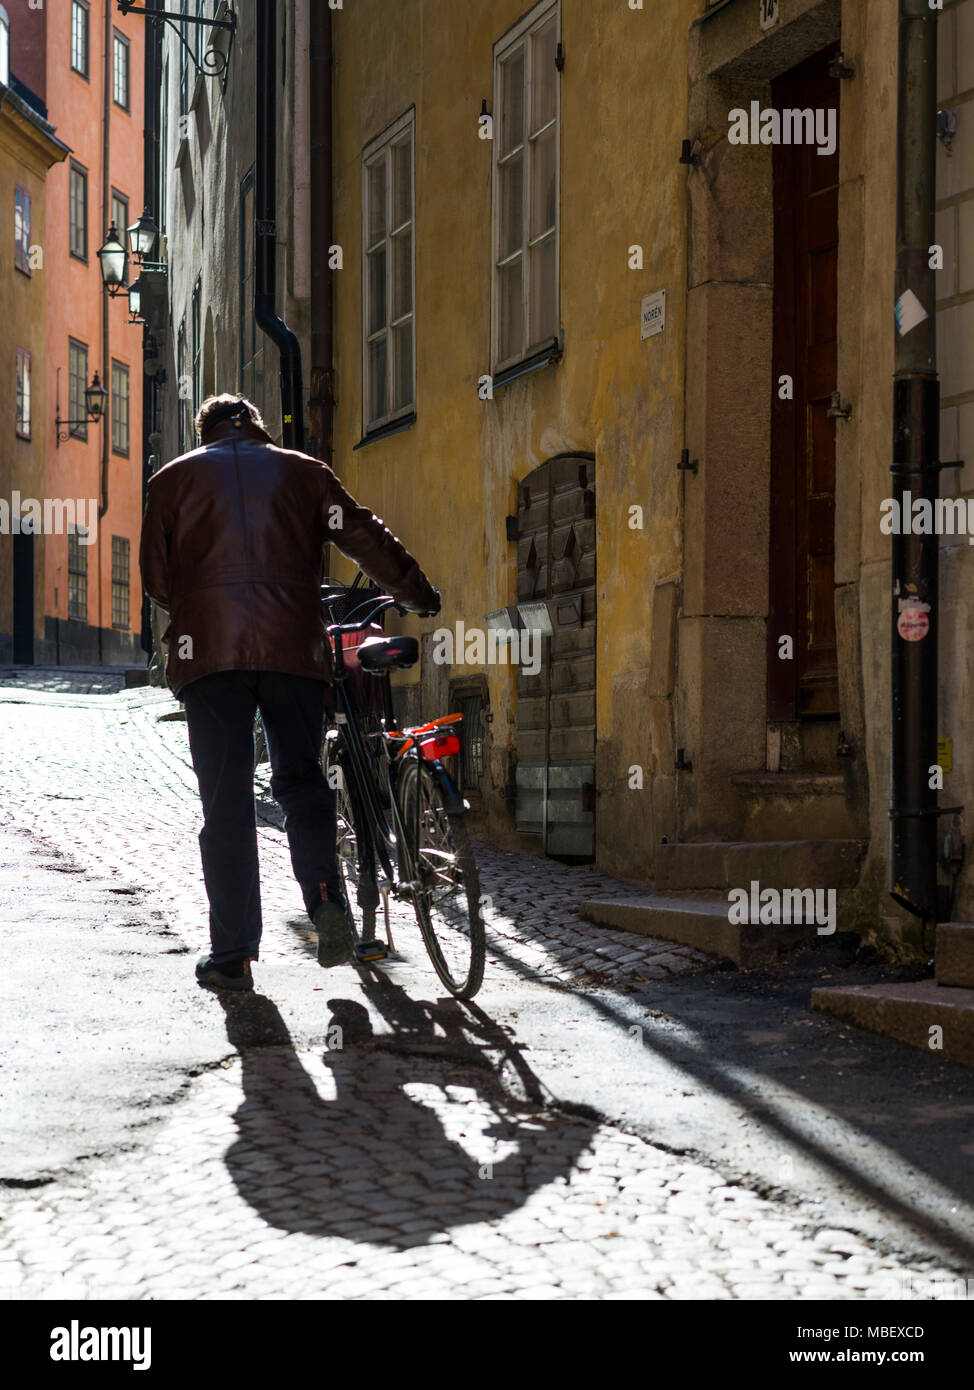 Man walking with bicycle in street, Gamla Stan, Stockholm, Sweden Stock Photo